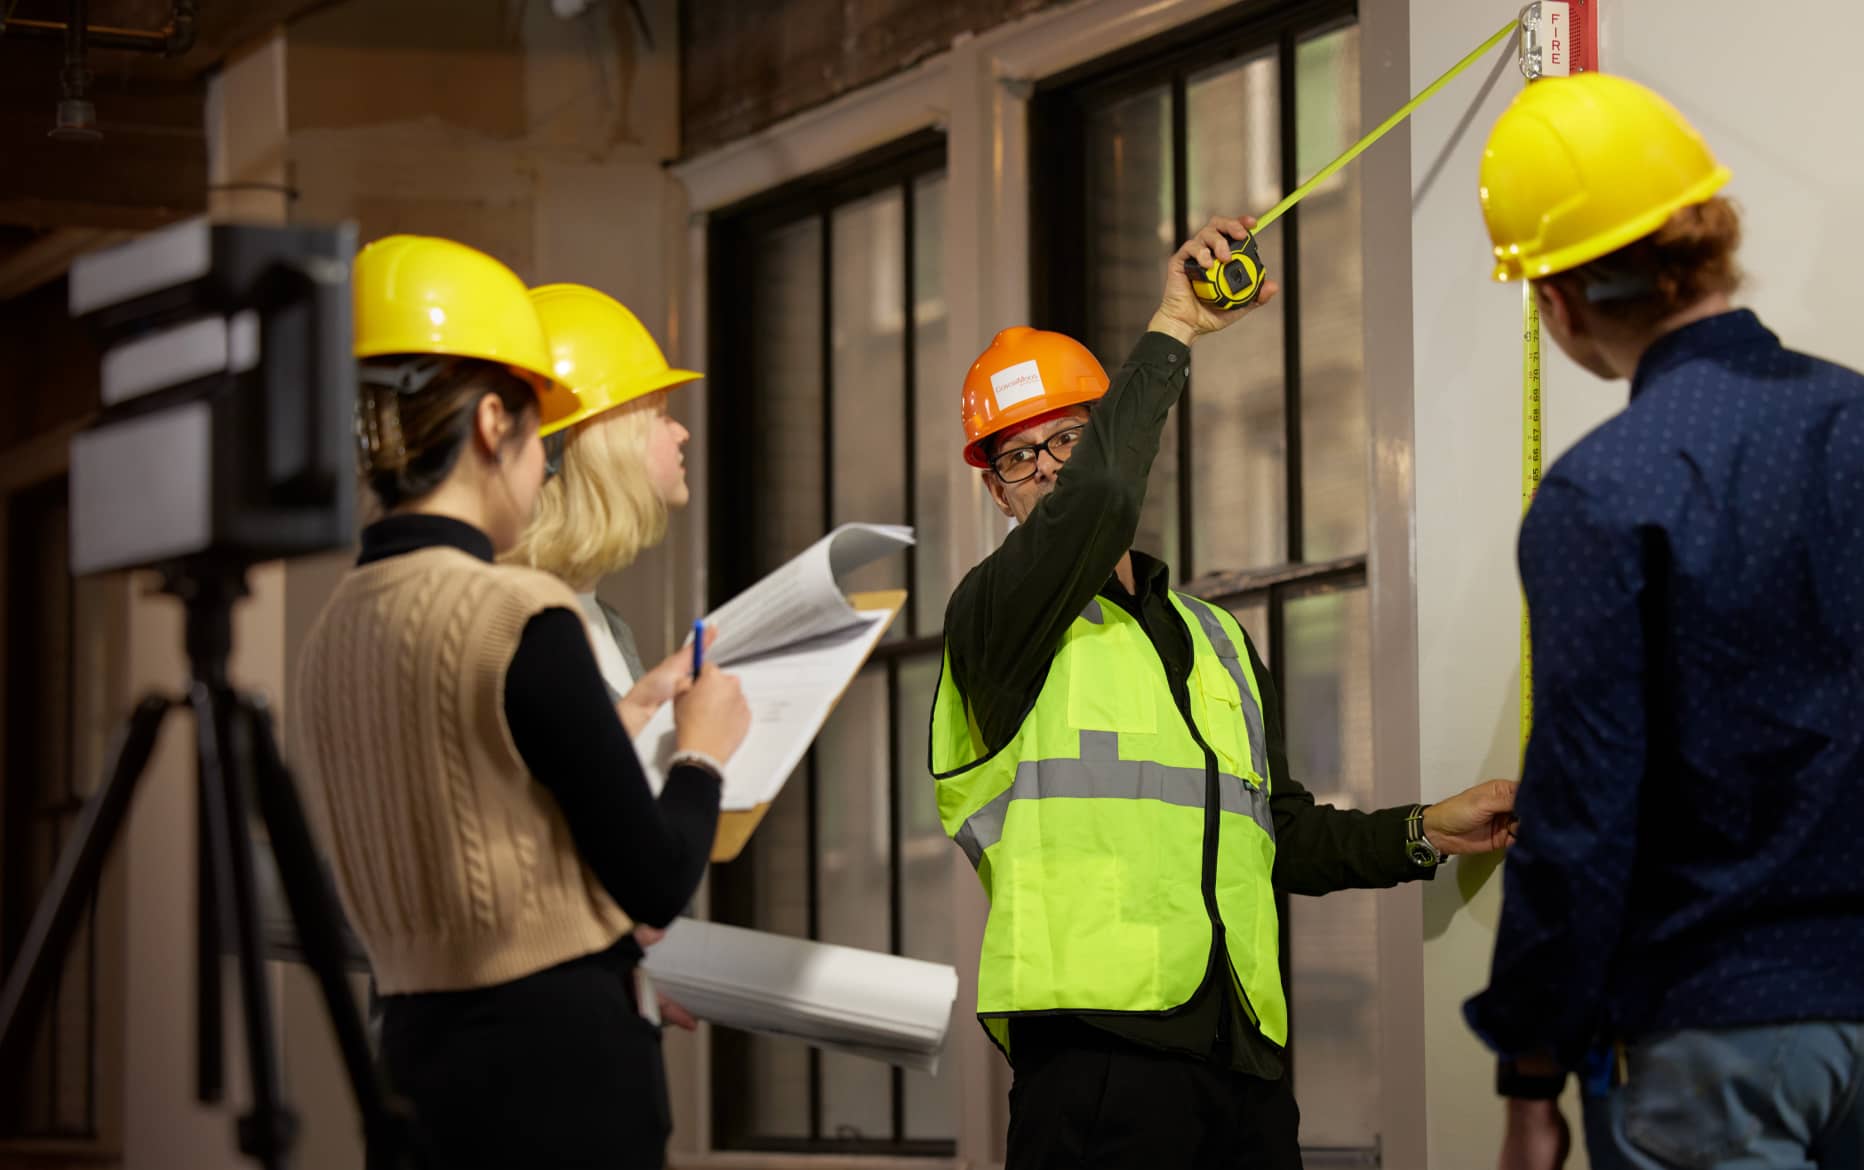 A man in an orange safety helmet is measuring a wall with a tape measure, while three others in yellow safety helmets are observing him and taking notes